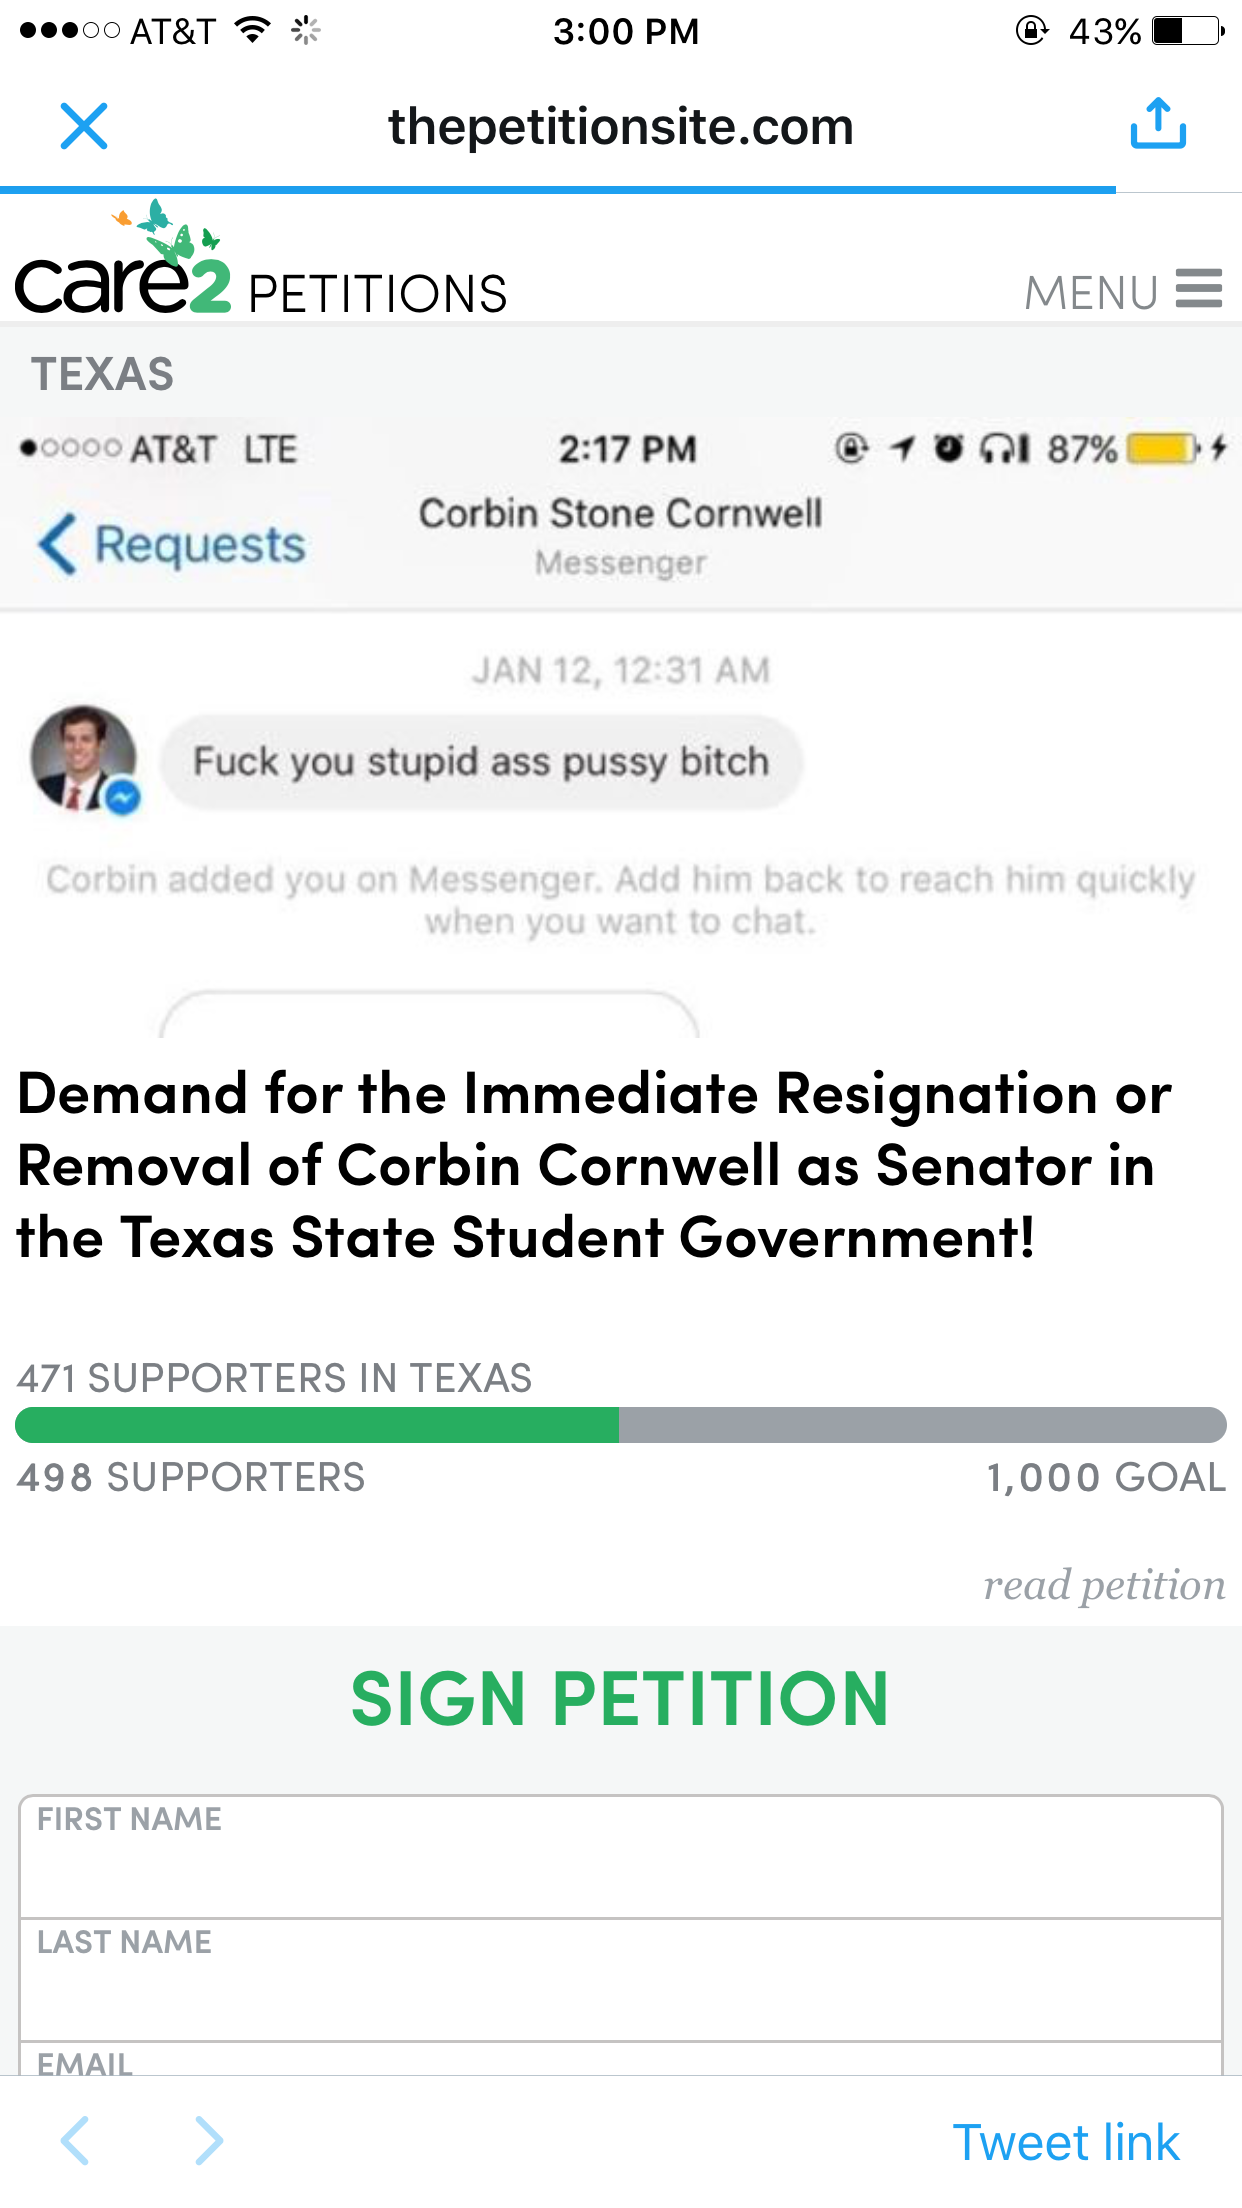 Offensive+content+toward+Texas+State+student+displayed+on+social+media